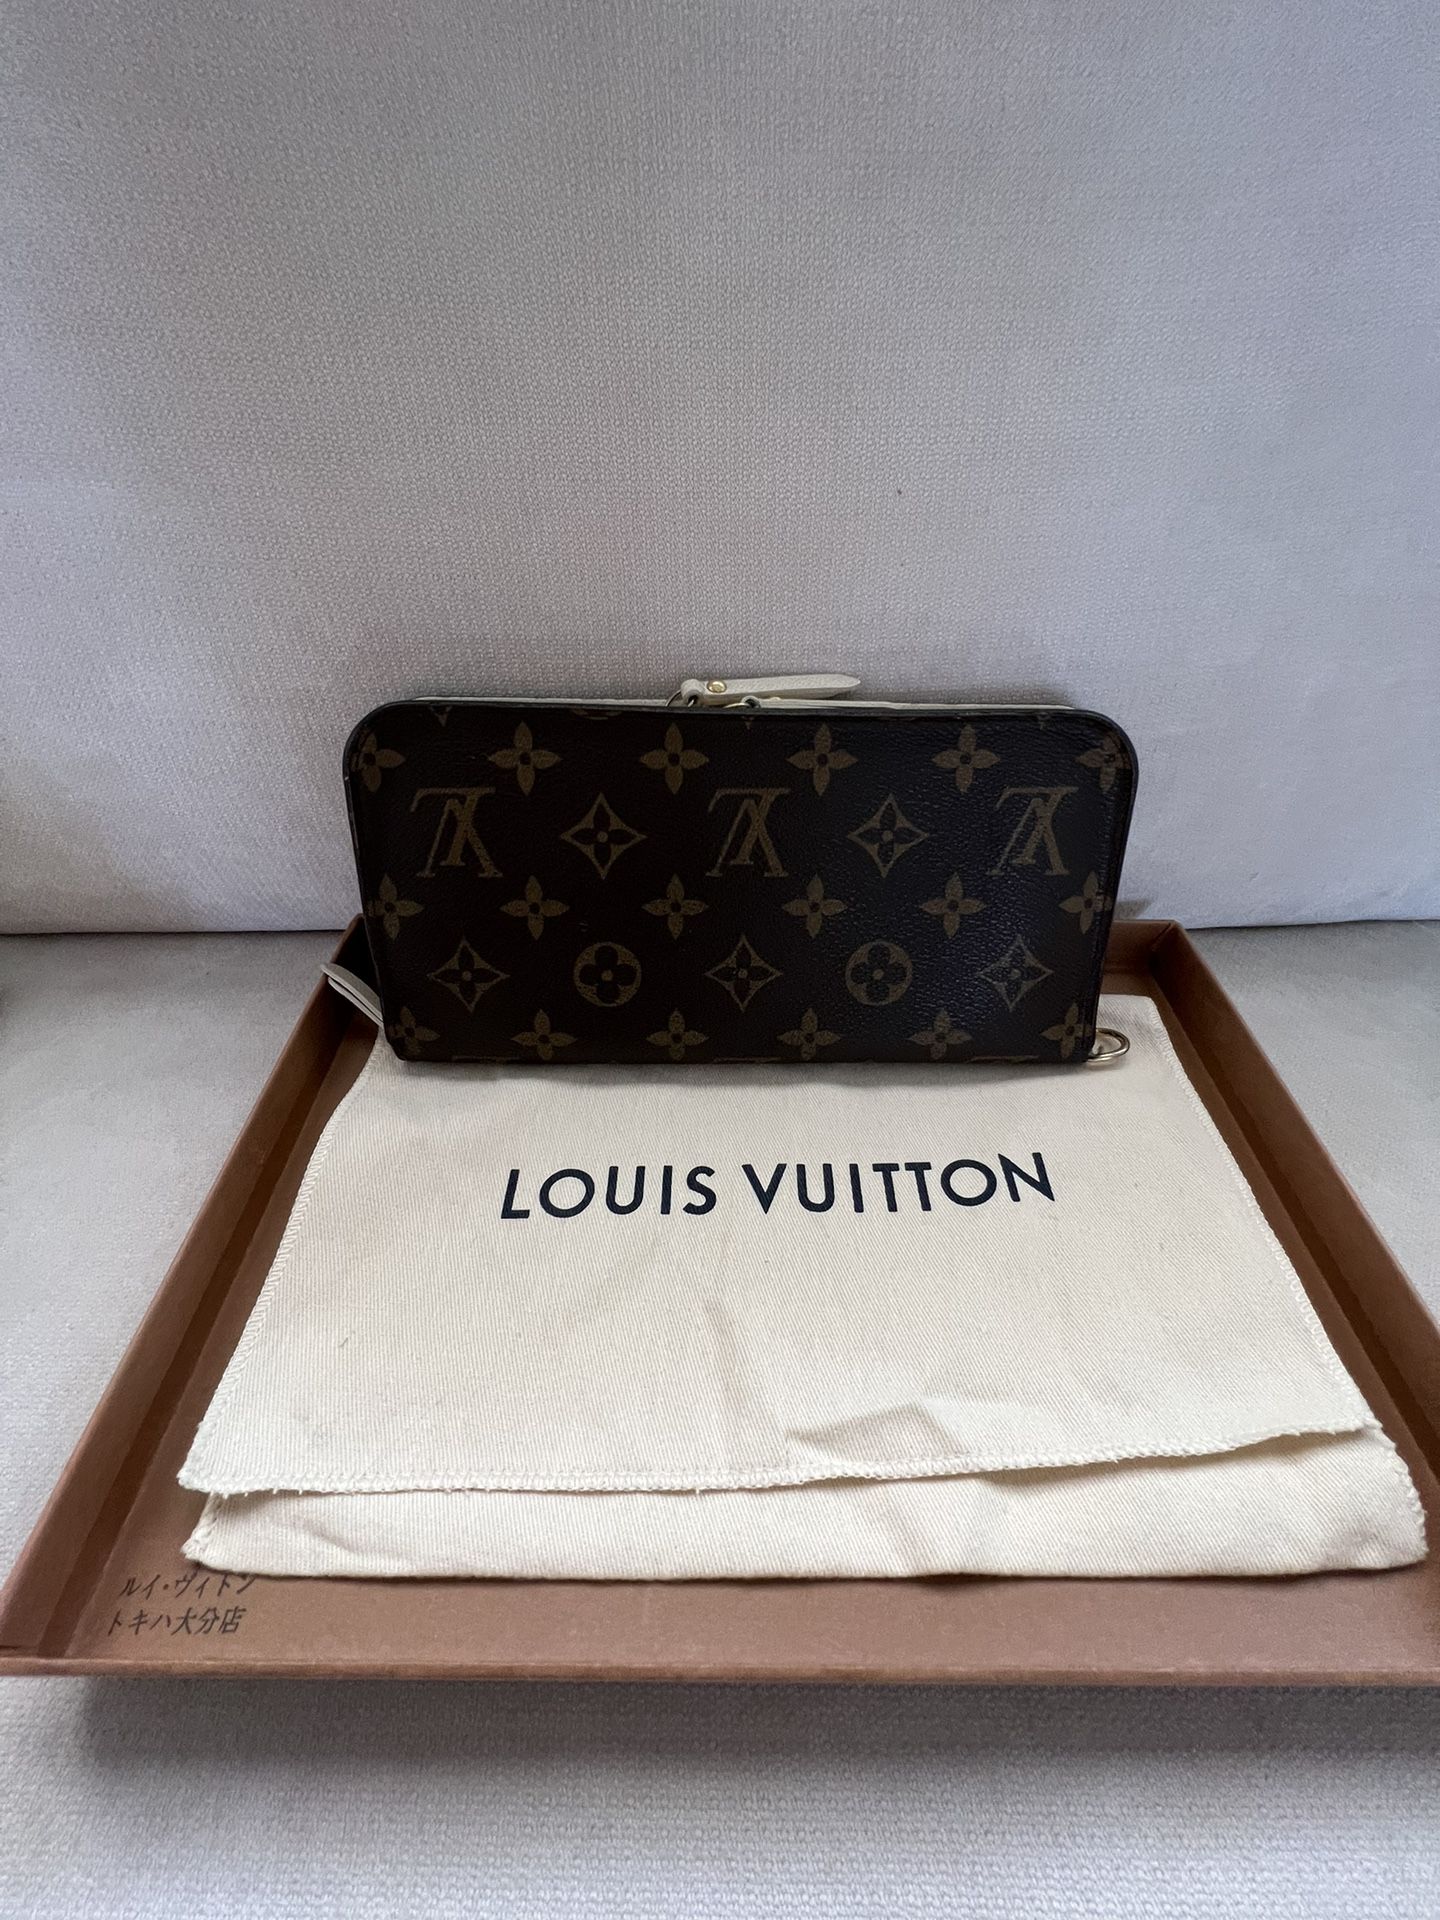 Louis Vuitton Large Zippy Organizer Wallet for Sale in Lake View Terrace,  CA - OfferUp